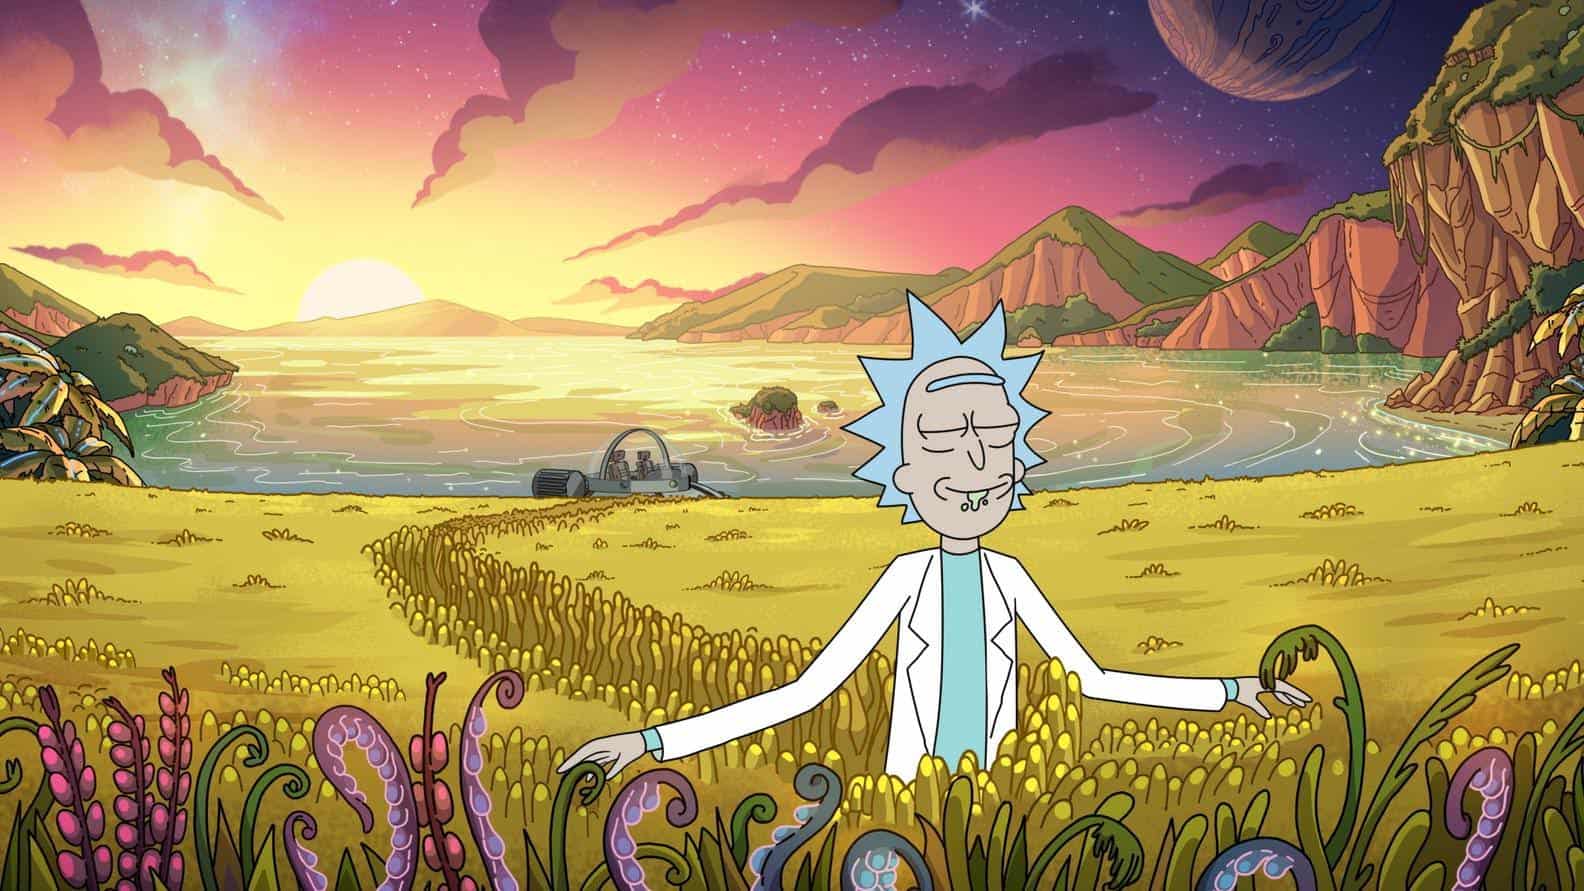 An animated scientist looking serene by an otherworldly lake in this image from Williams Street